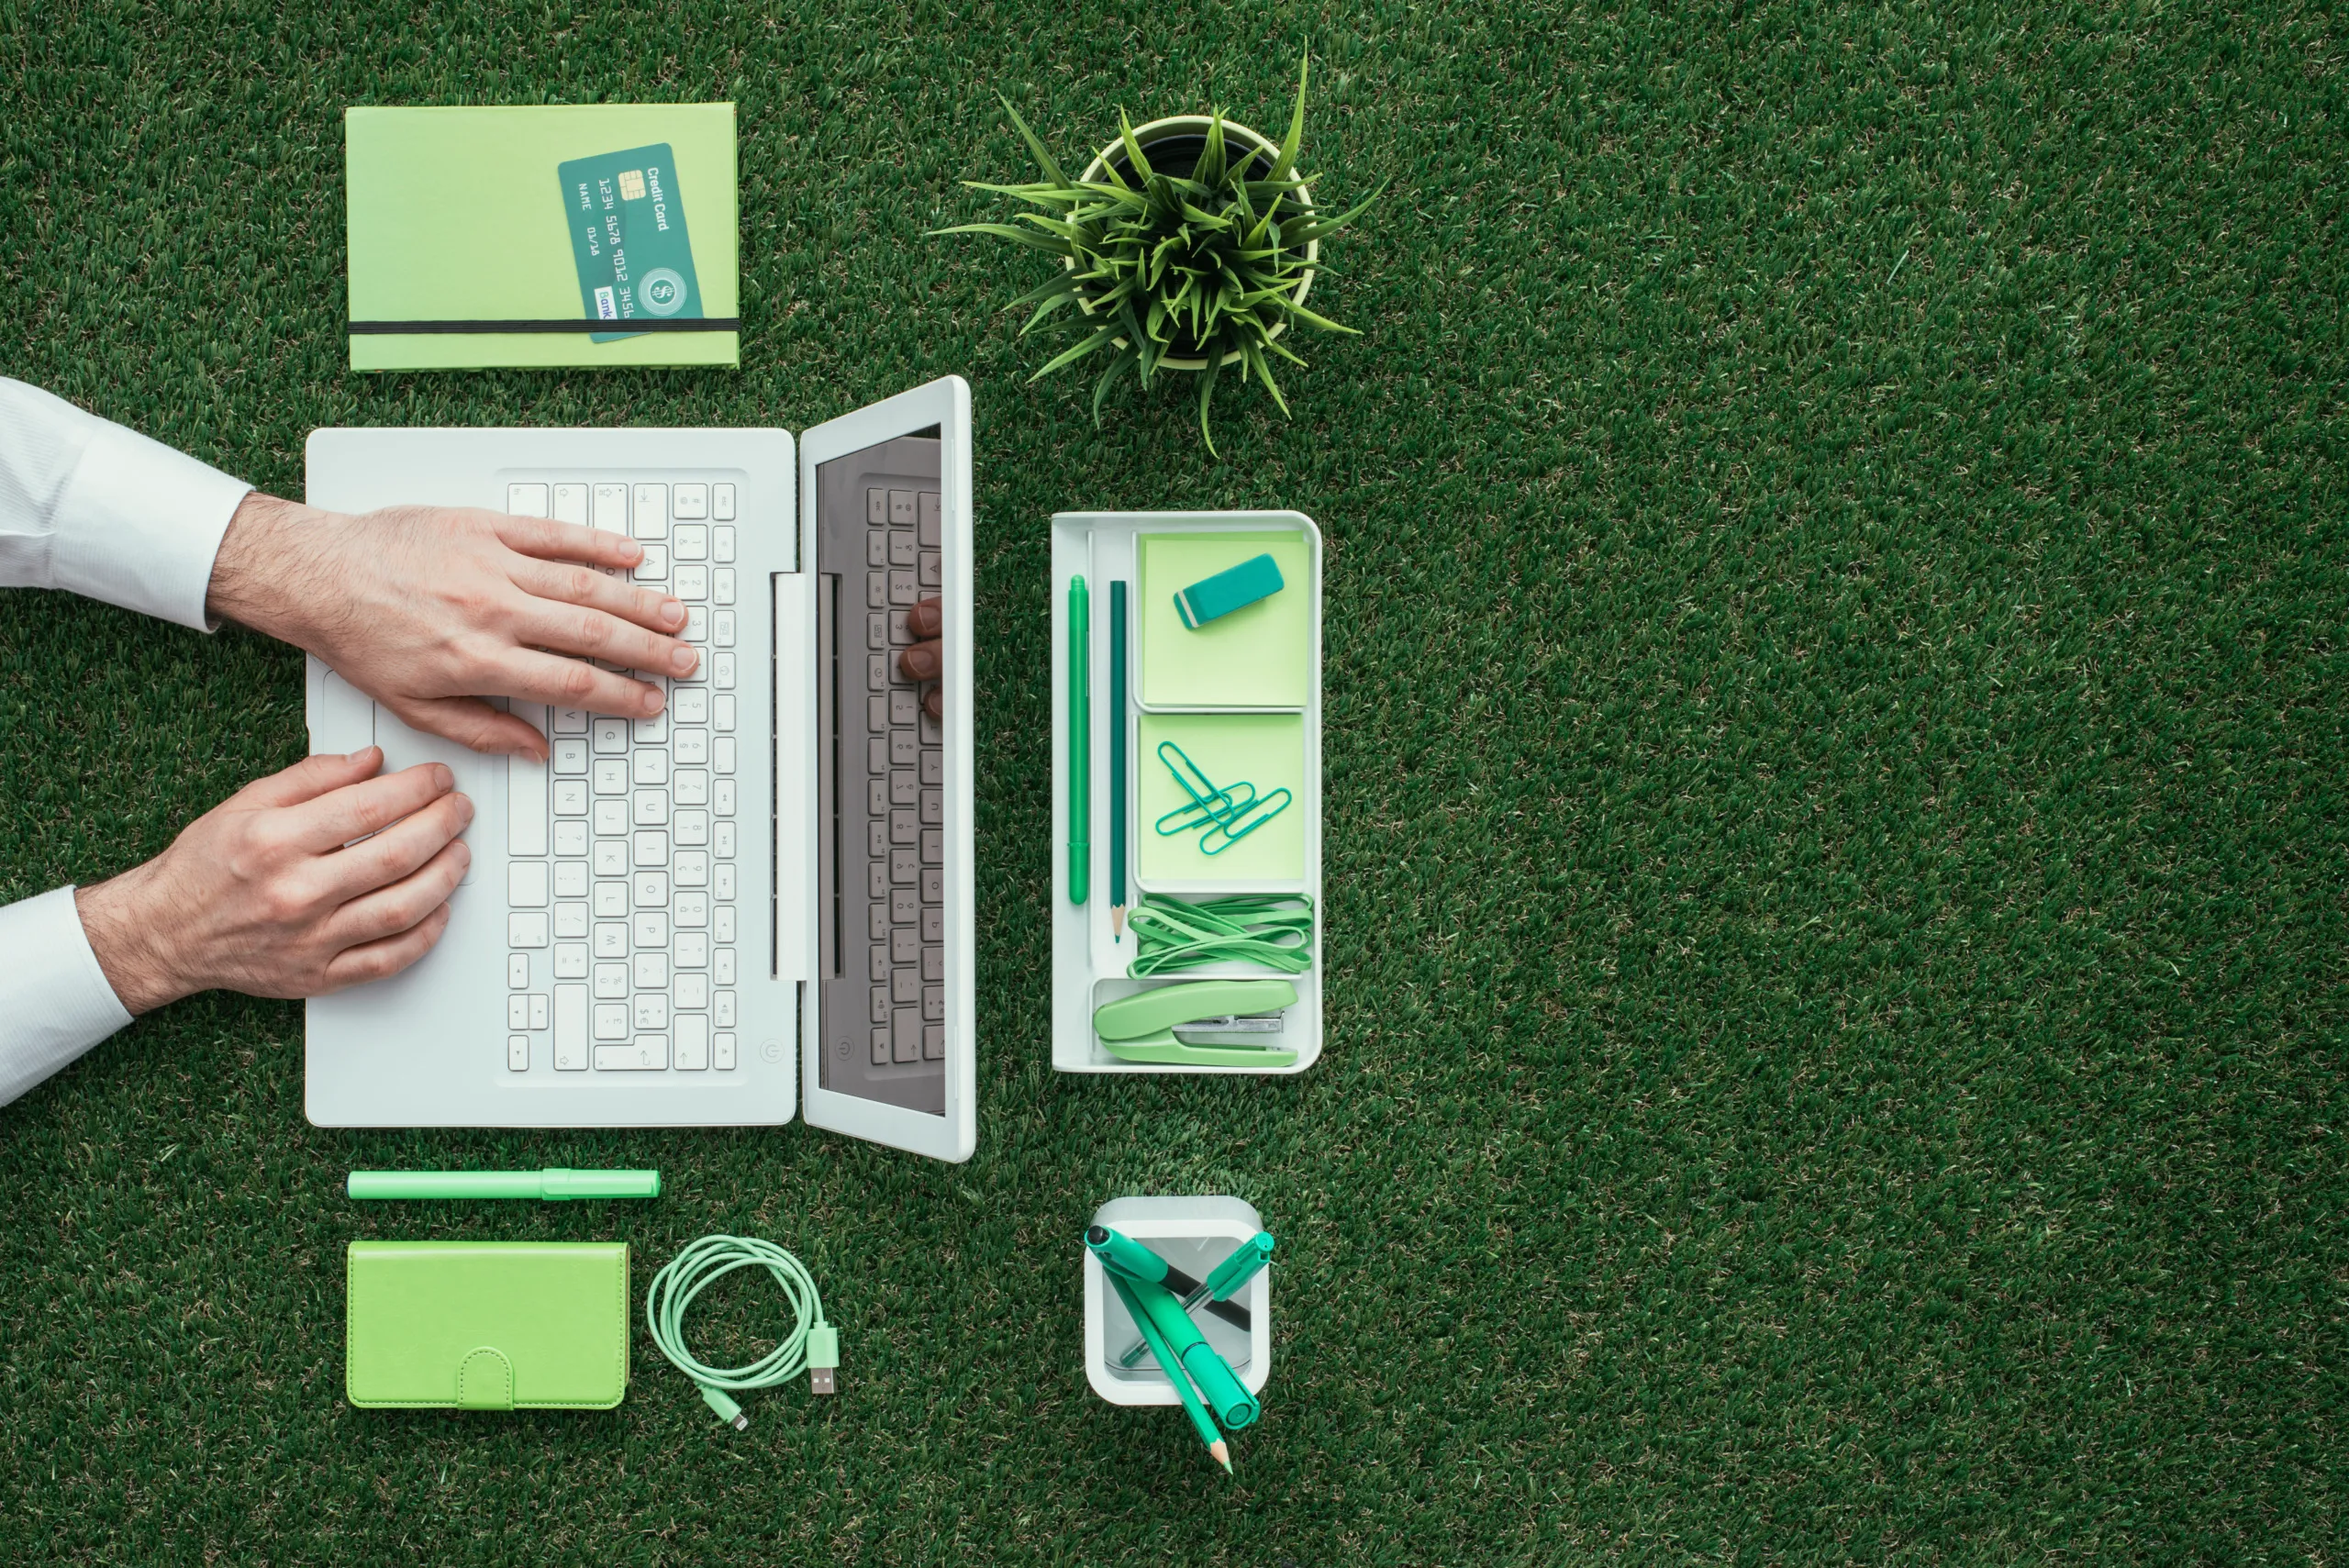 Top Eco-Friendly Gadgets for a Green Office